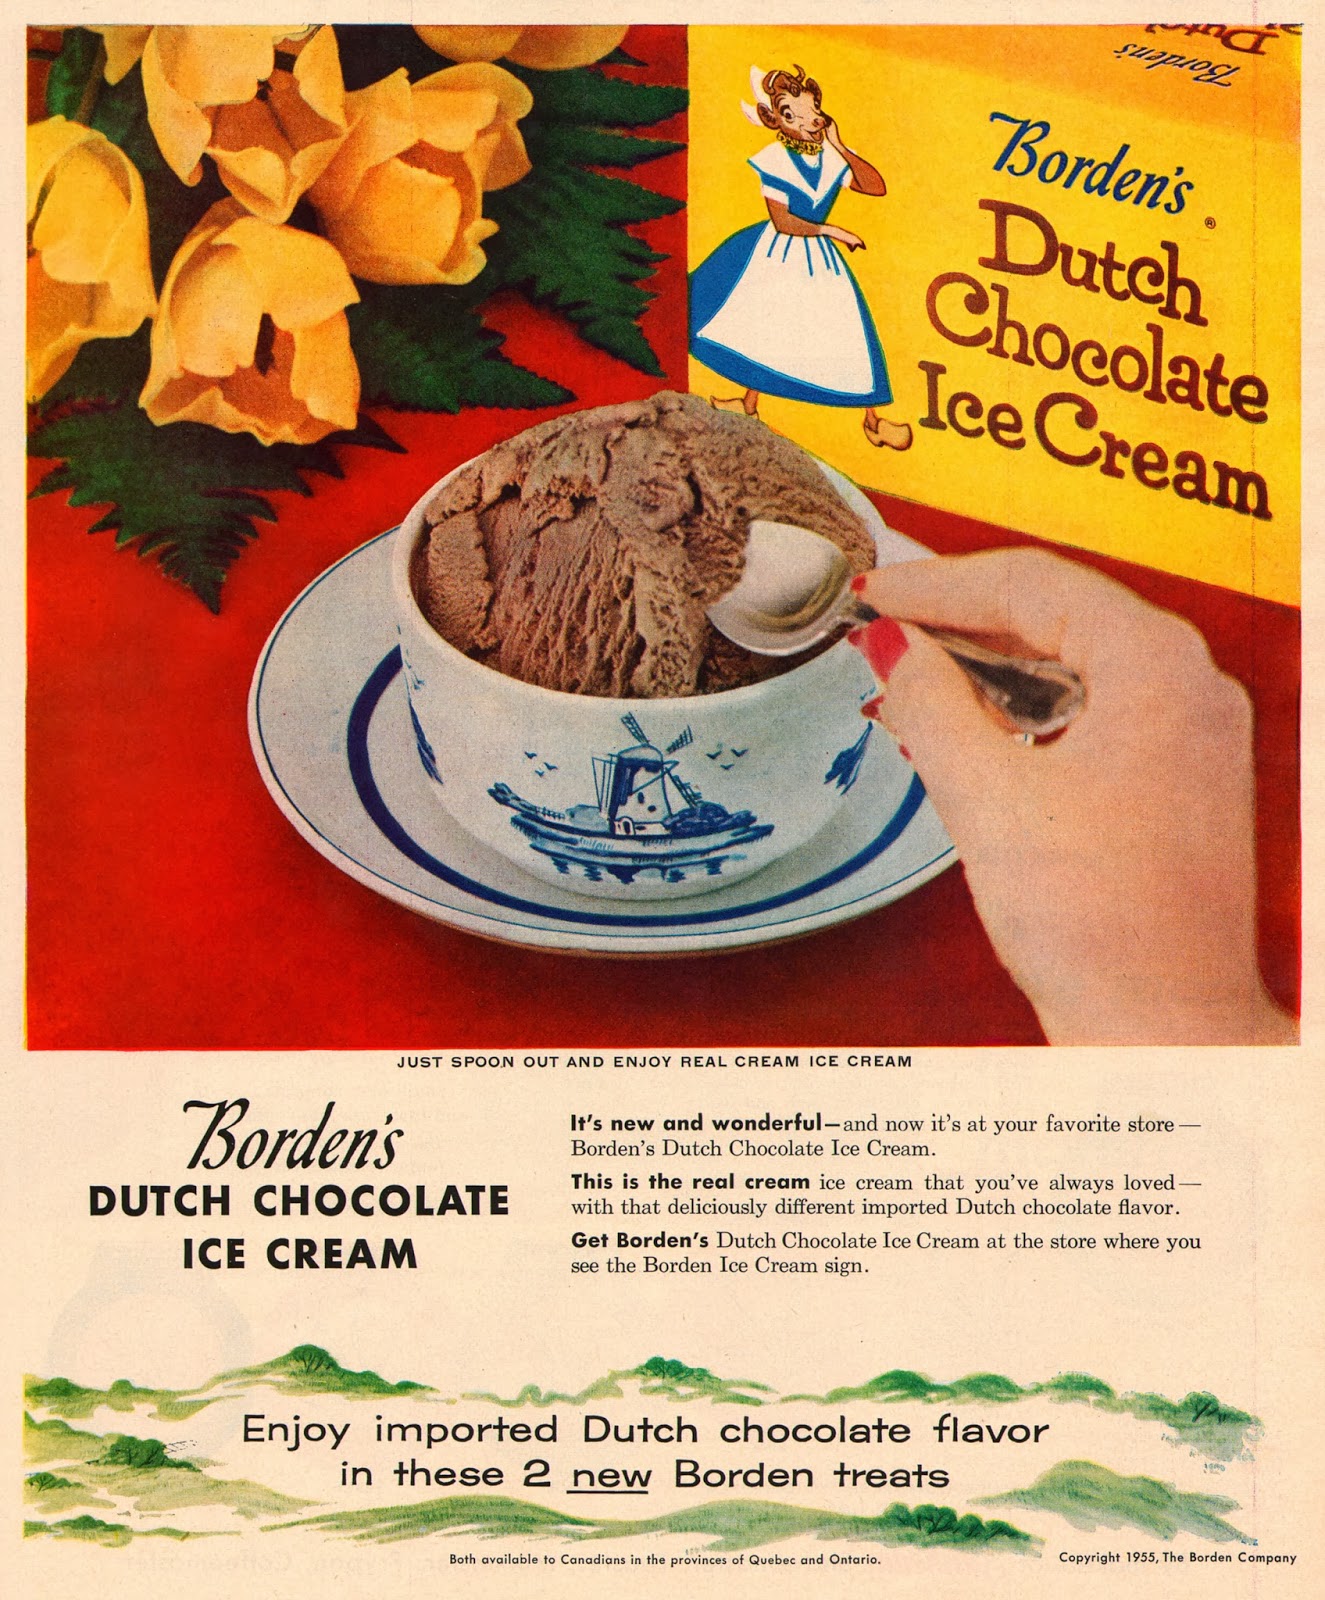 14 Interesting Vintage Food Ads From The 1950s Vintage Everyday